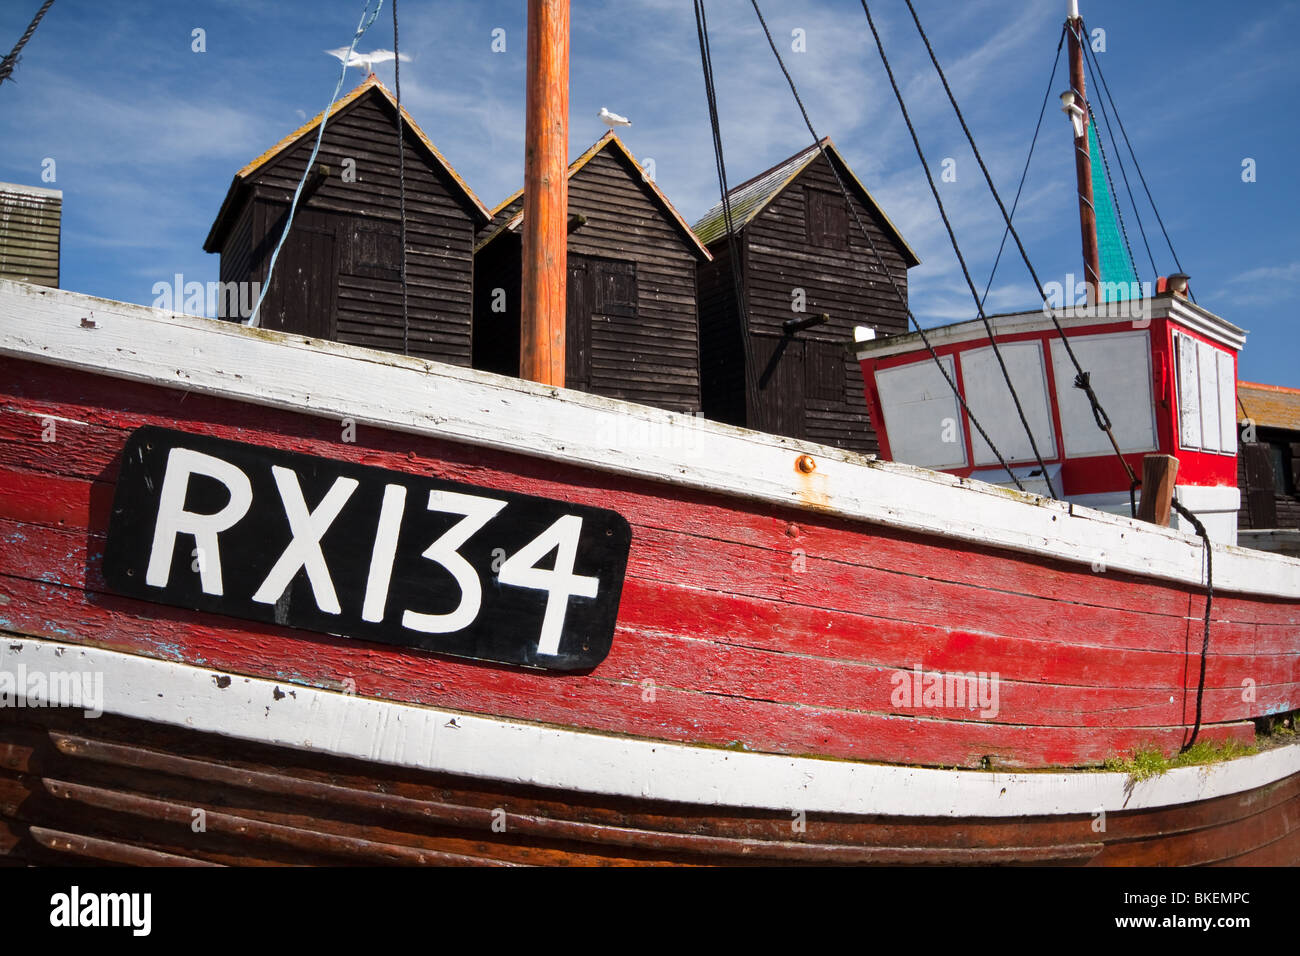 https://c8.alamy.com/comp/BKEMPC/fishing-boat-and-traditional-net-huts-hastings-east-sussex-BKEMPC.jpg